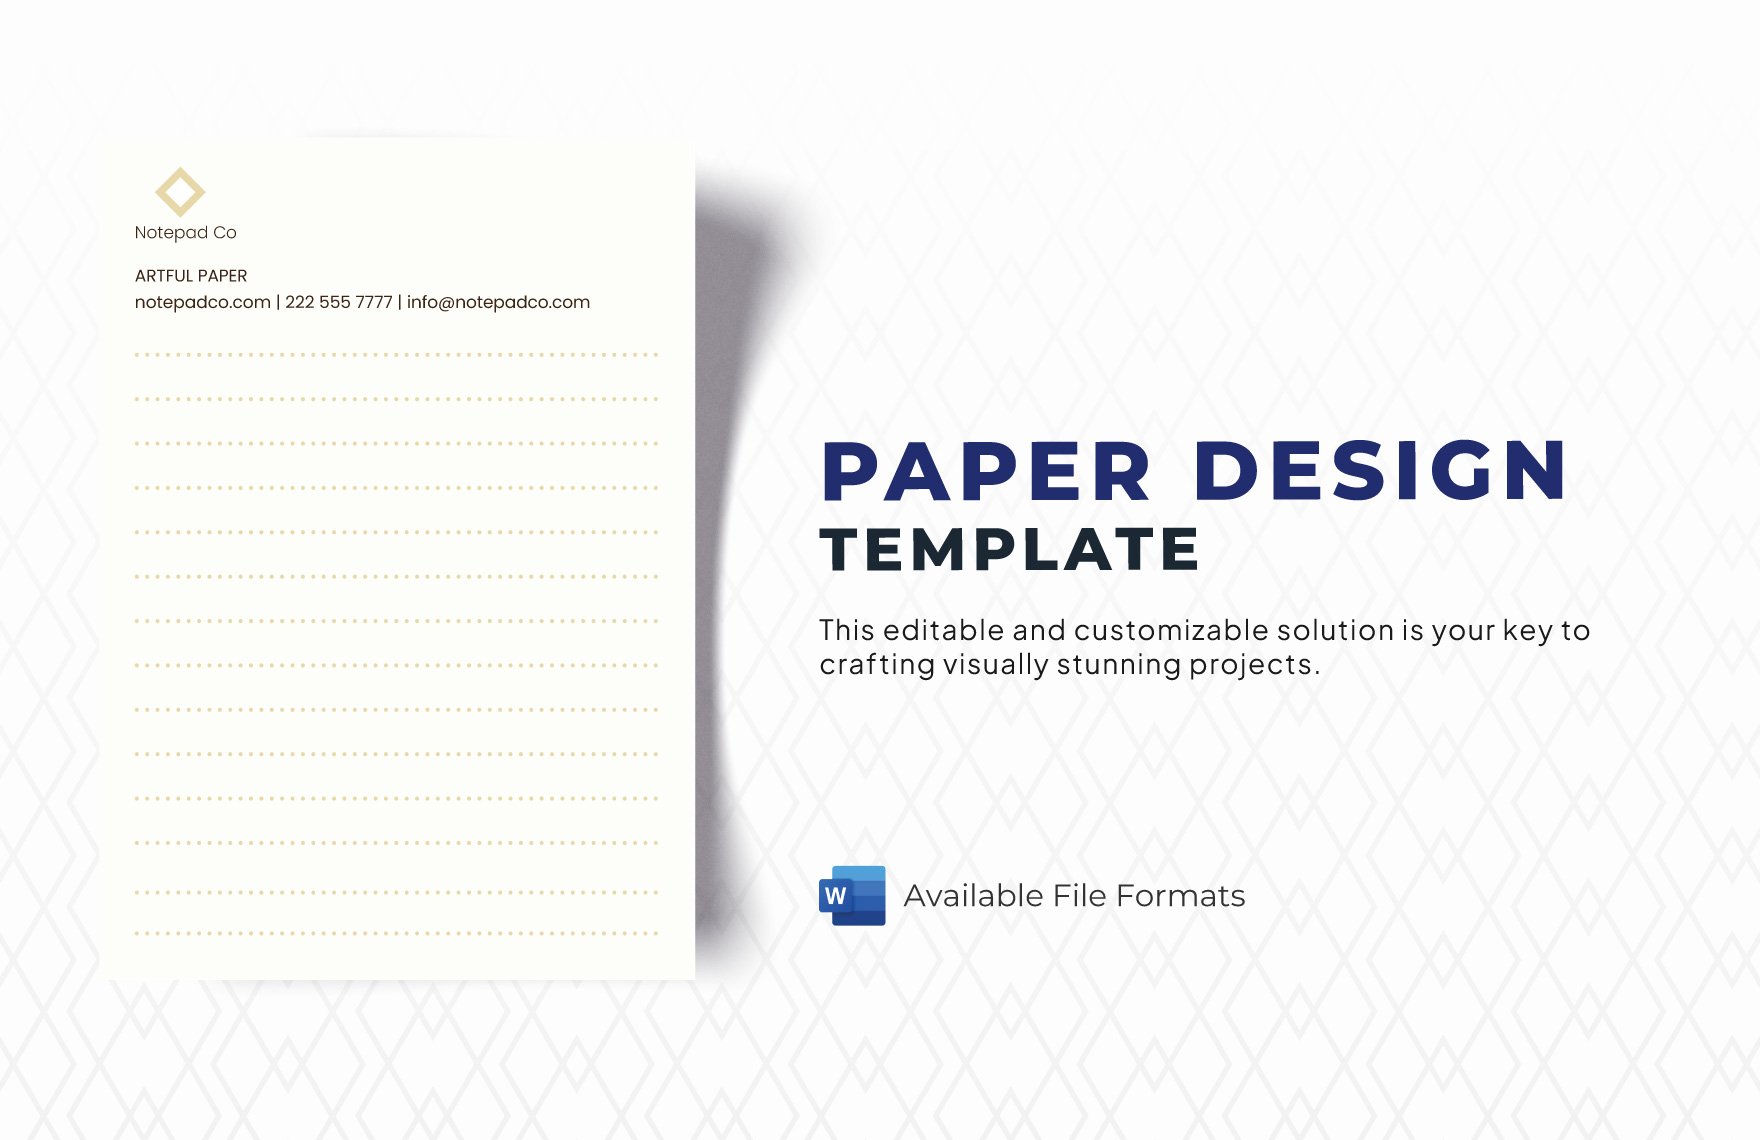 Free Paper Design Template in Word